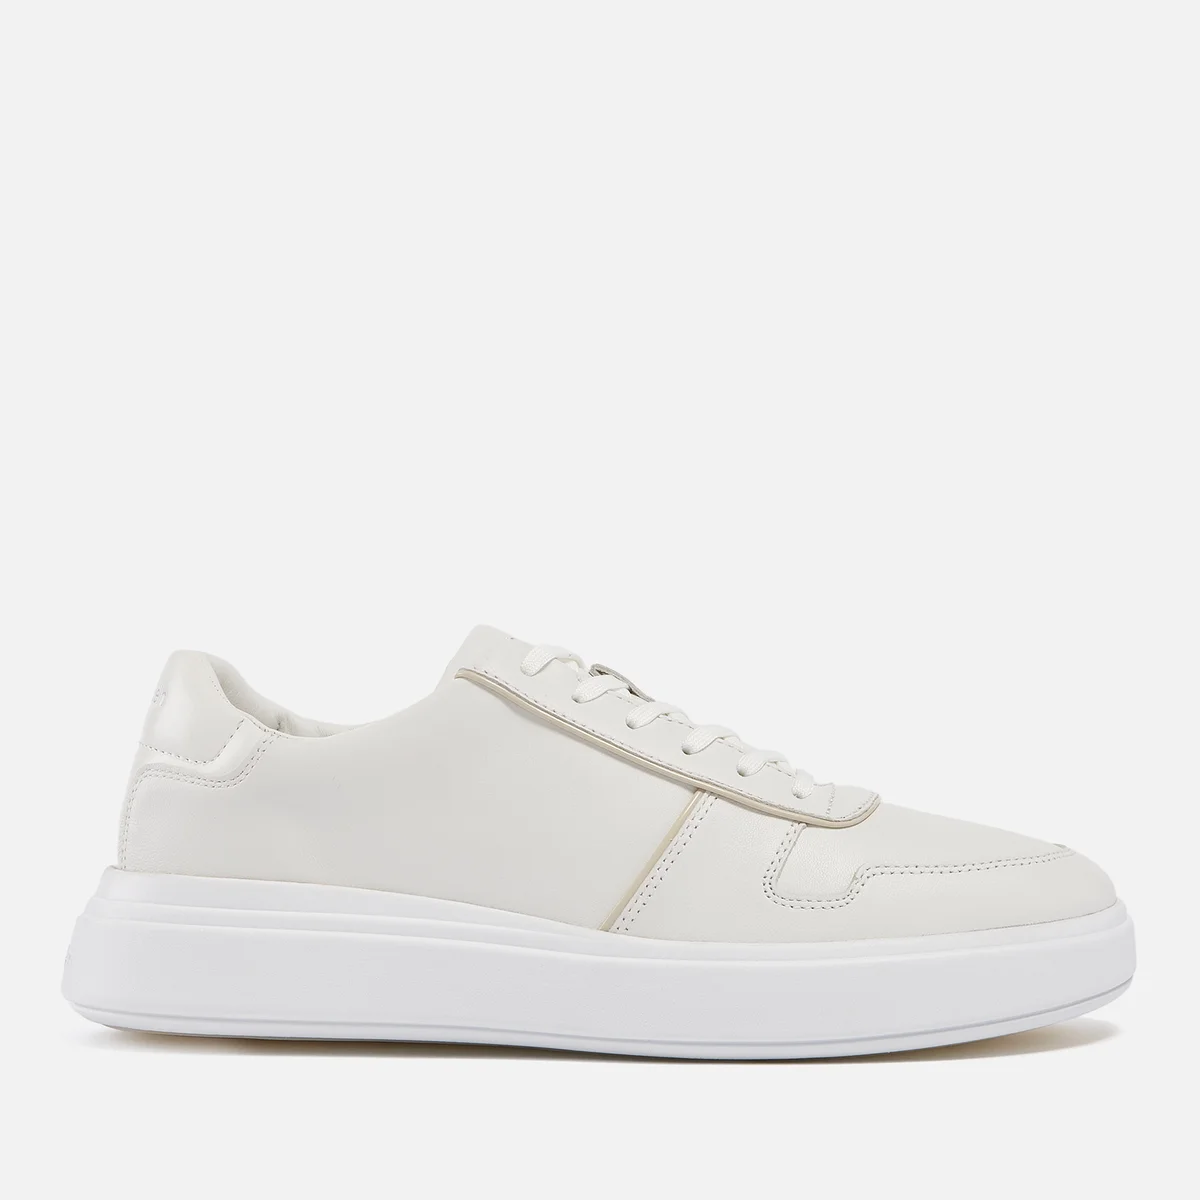 Calvin Klein Men's Leather Trainers Image 1